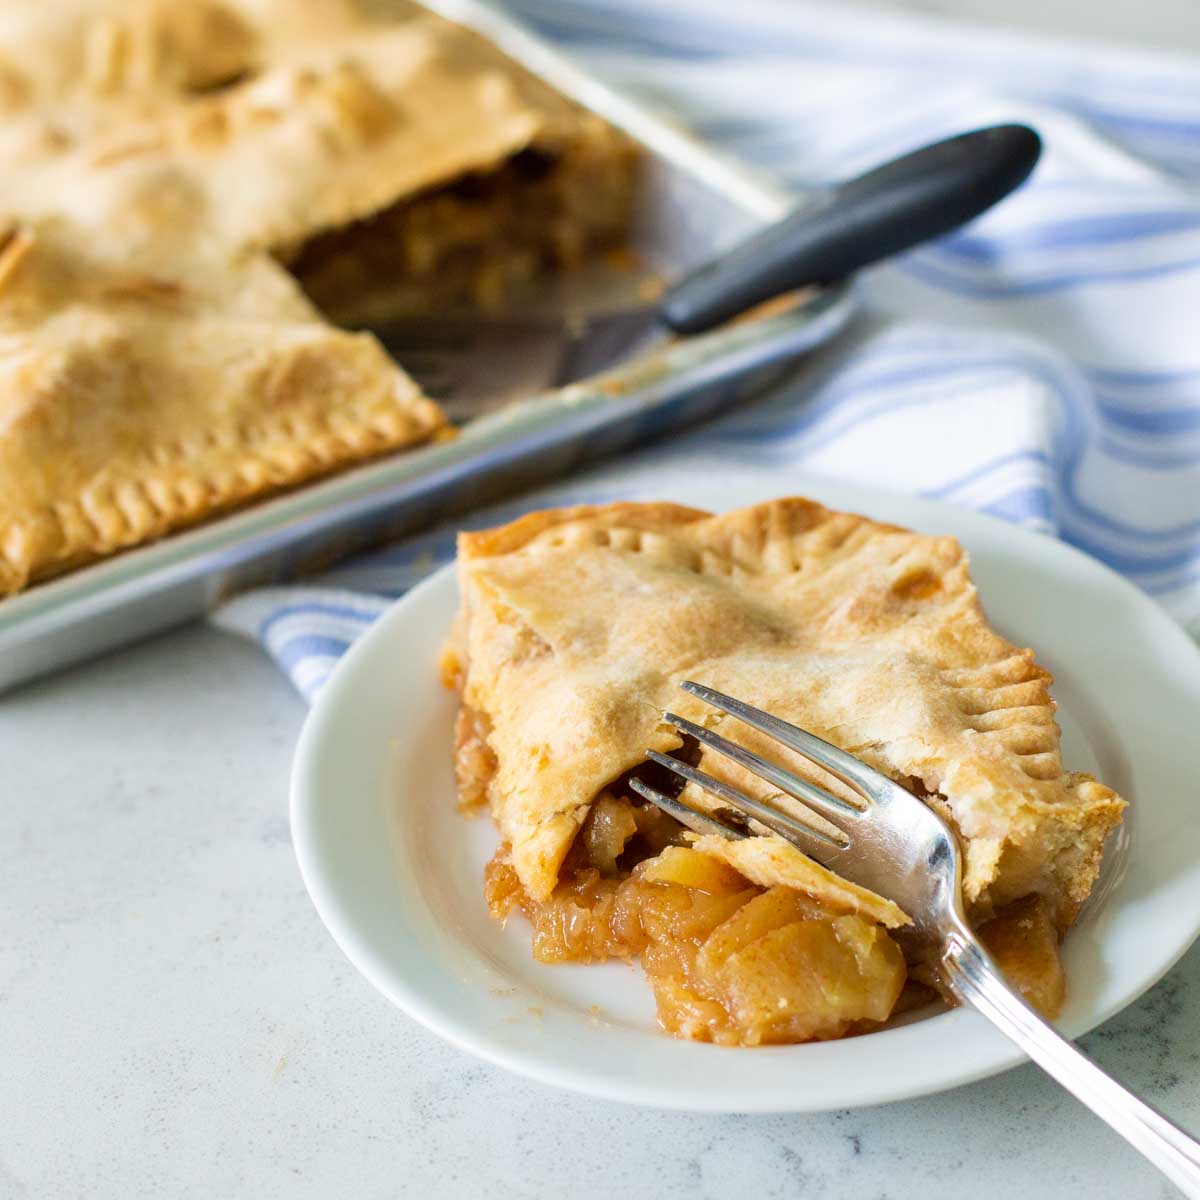 A square piece of apple pie has a fork taking a bite.